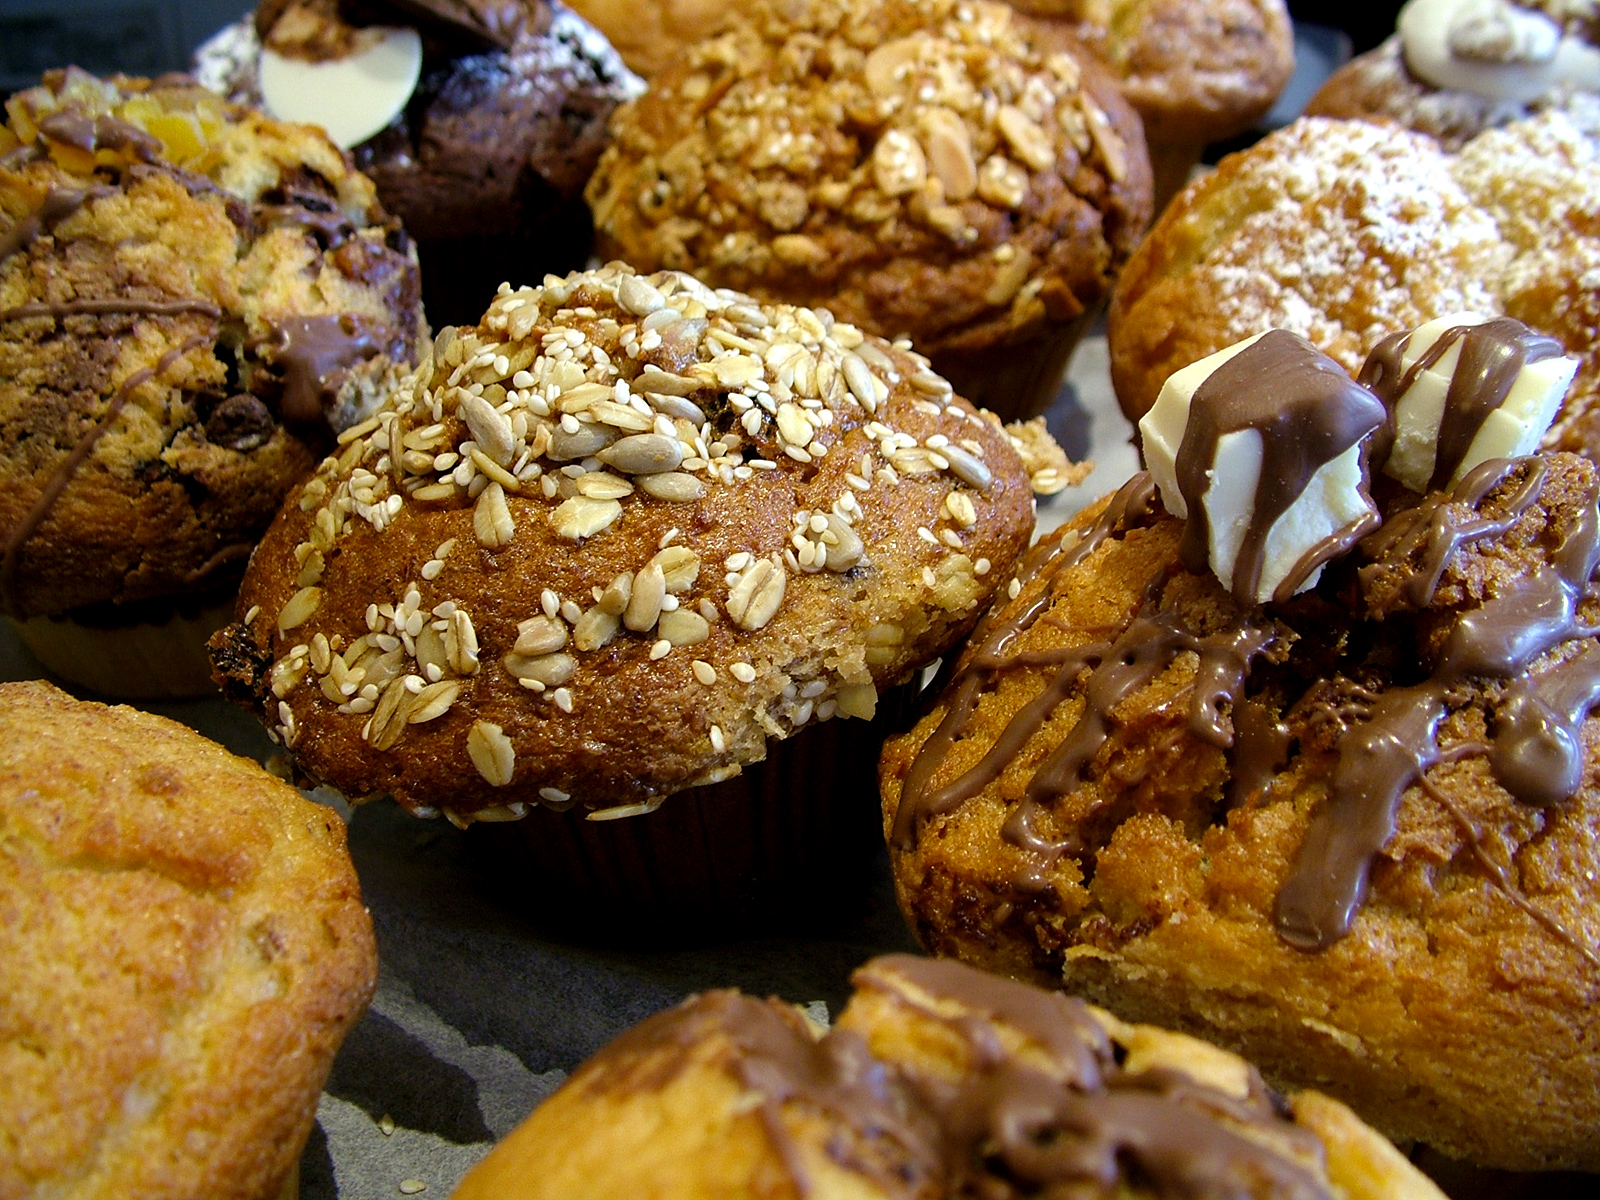 A platter of muffins and baked goods.